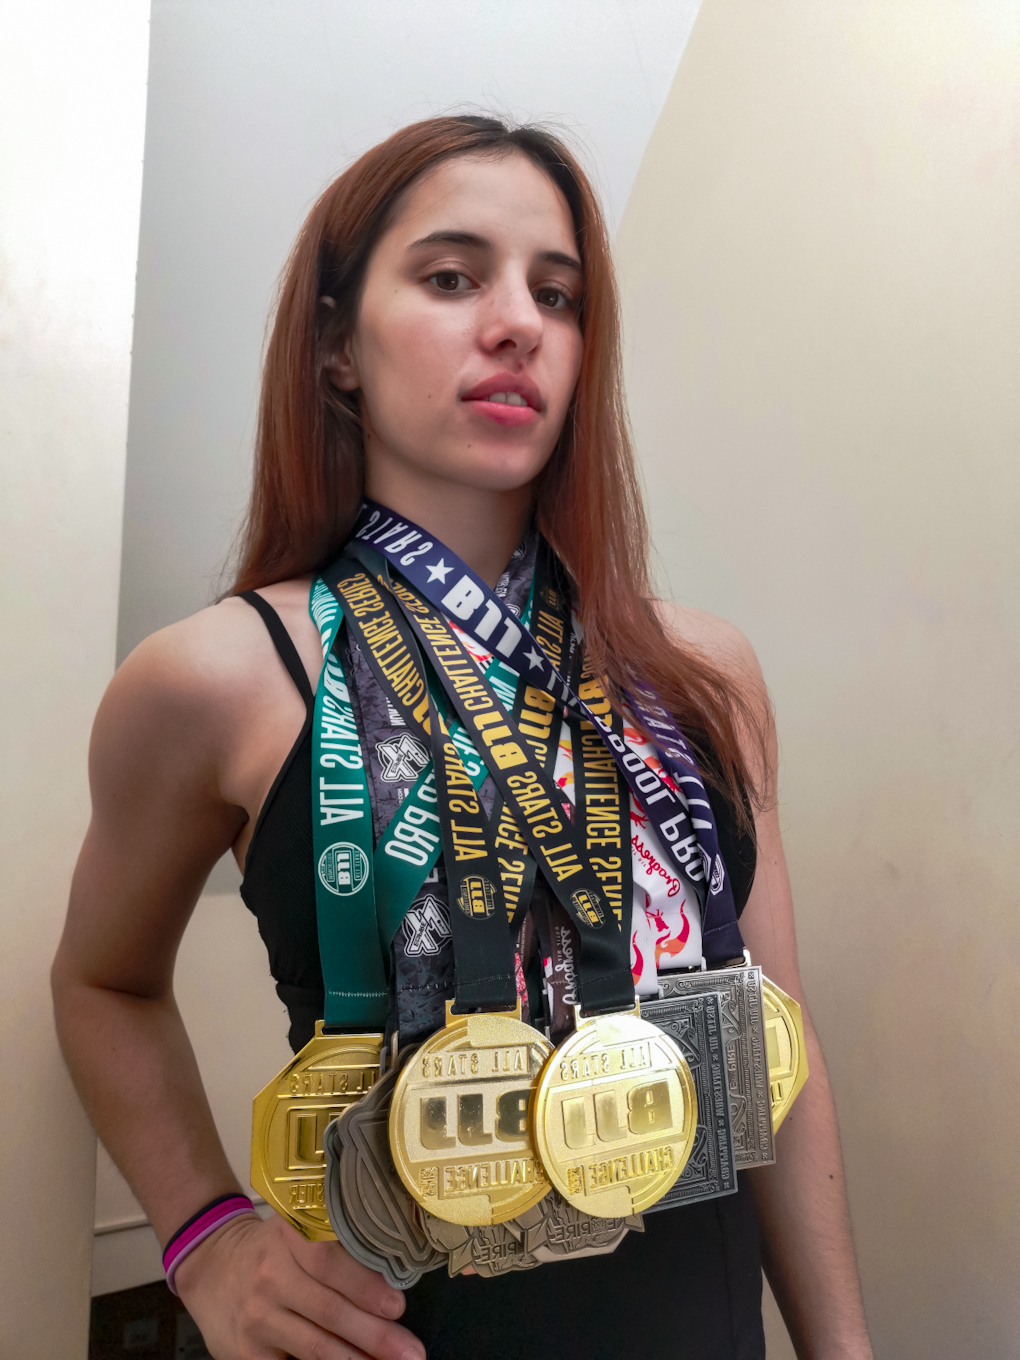 denissa with lots of medals